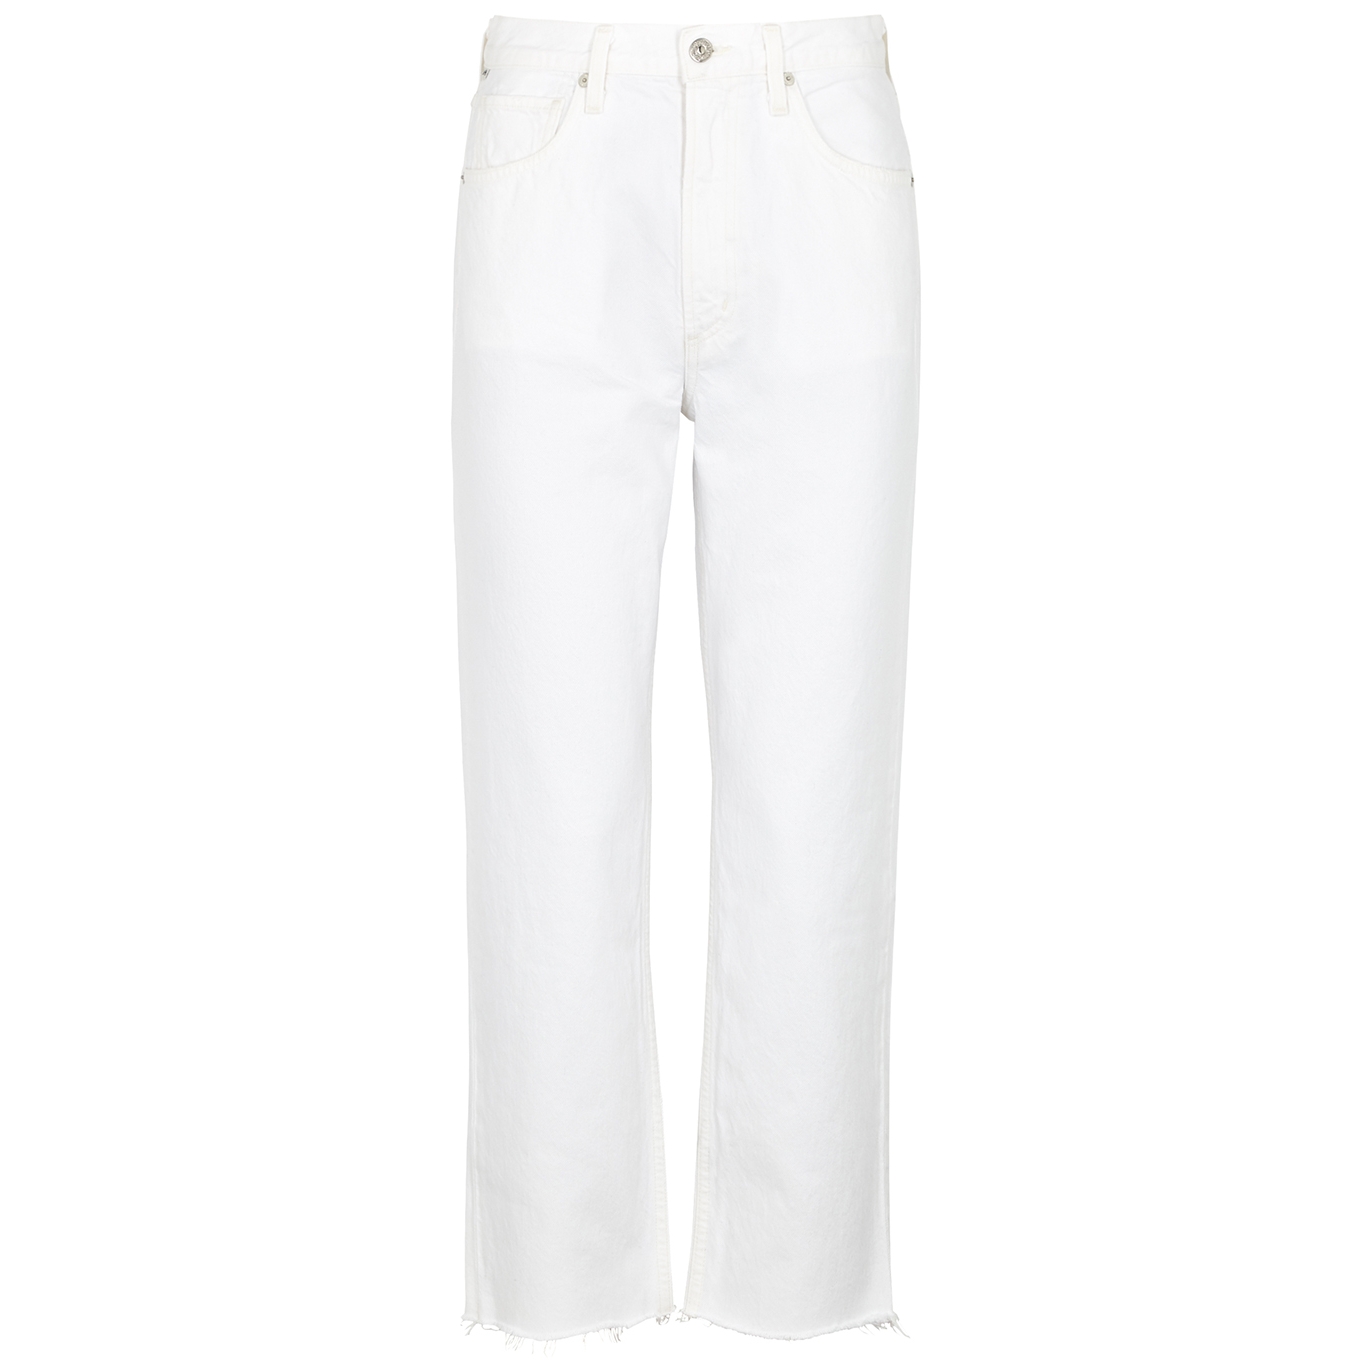 Citizens of Humanity Daphne White Straight-Leg Jeans